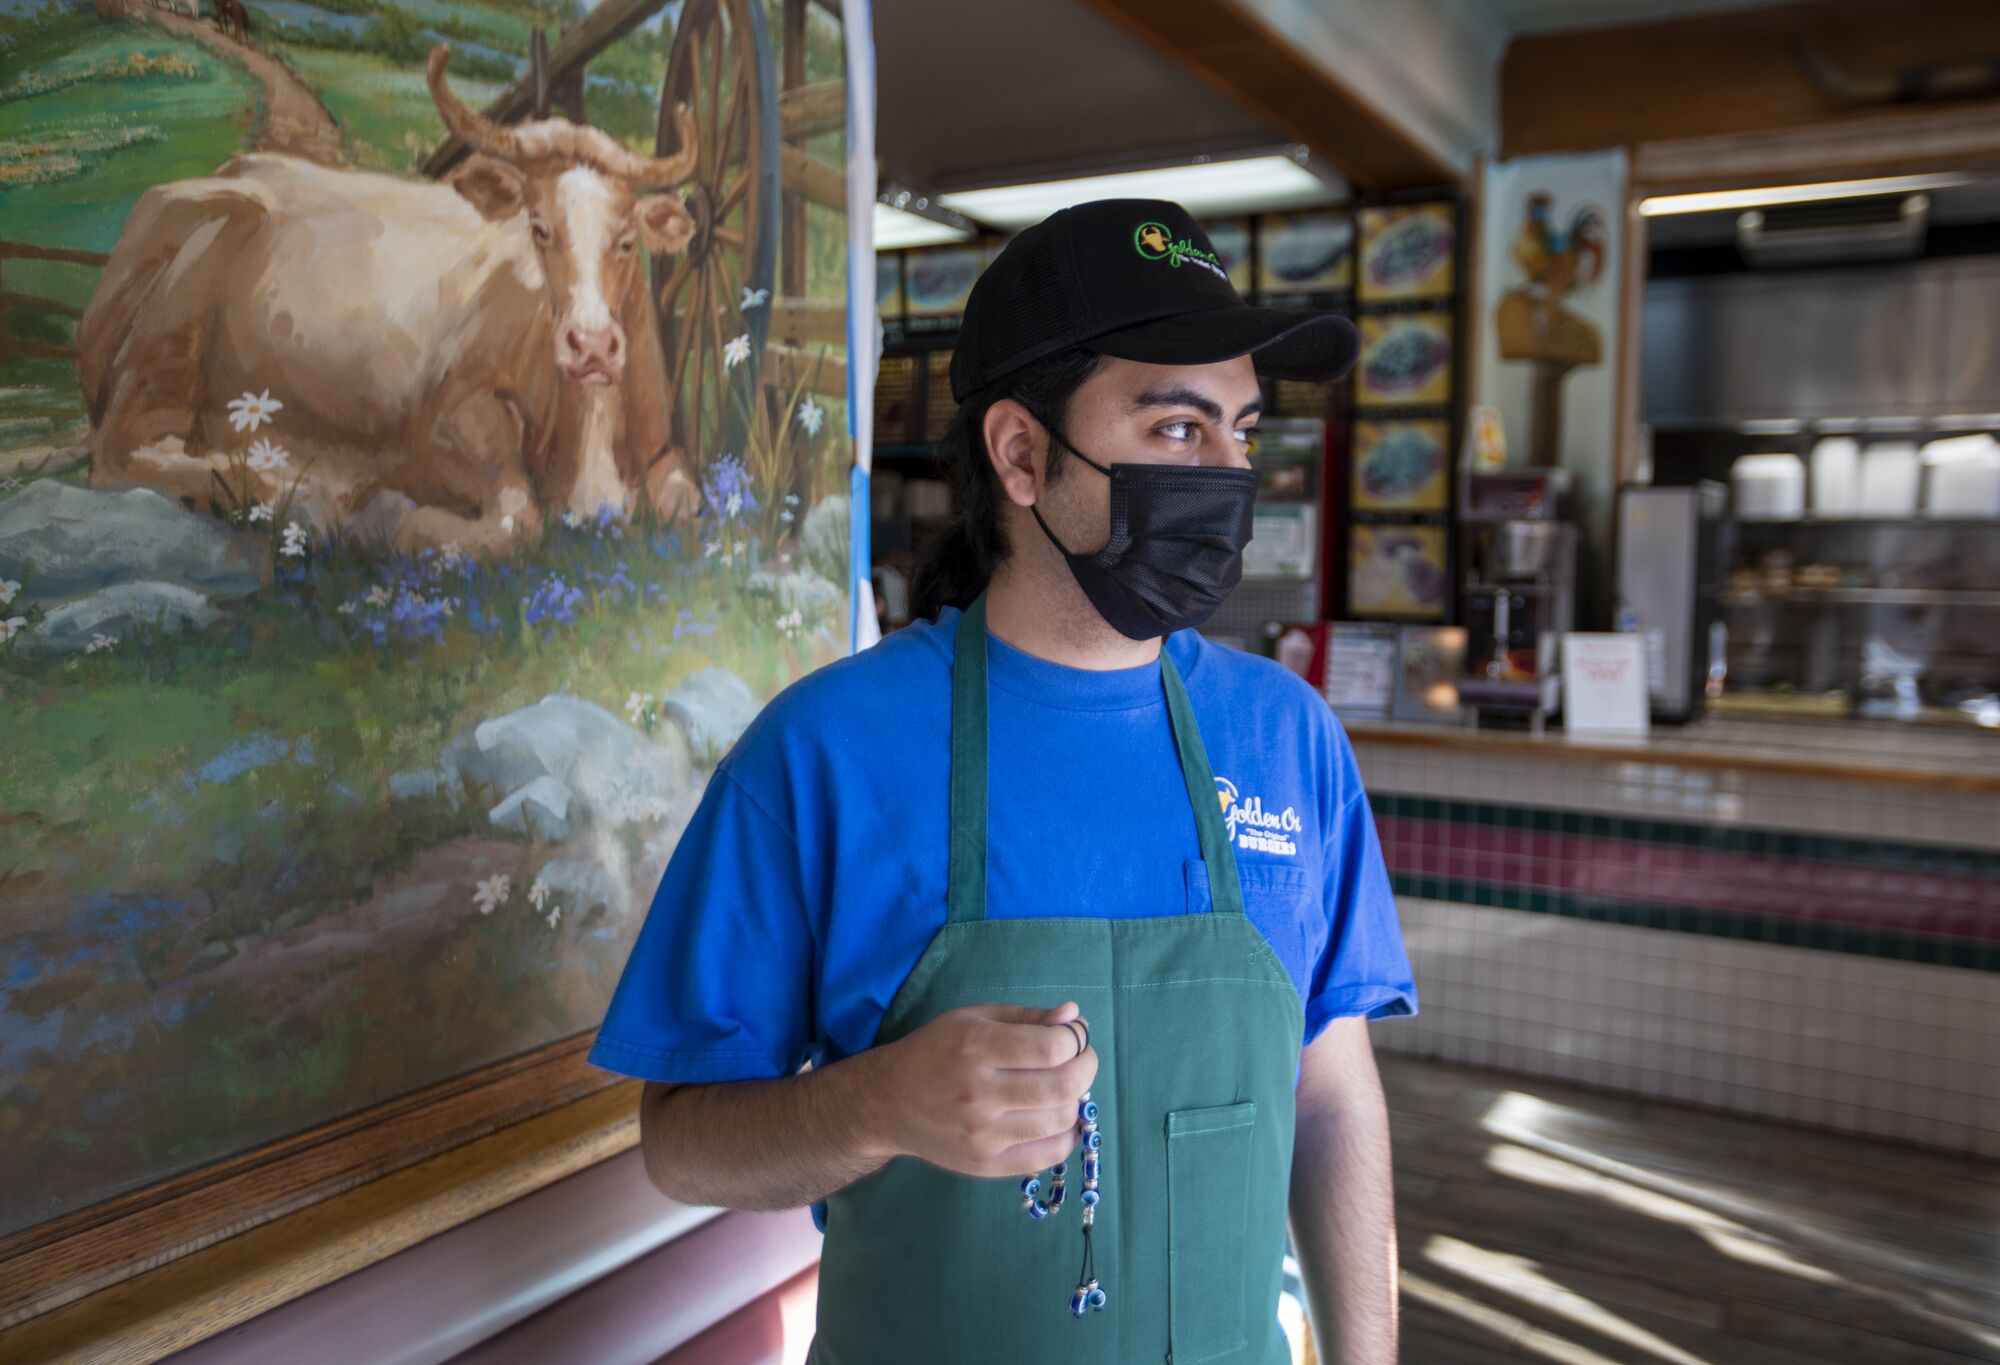 Konstantinos Varelas, manager of Golden Ox Burgers, holds his worry beads while working at the restaurant in El Monte